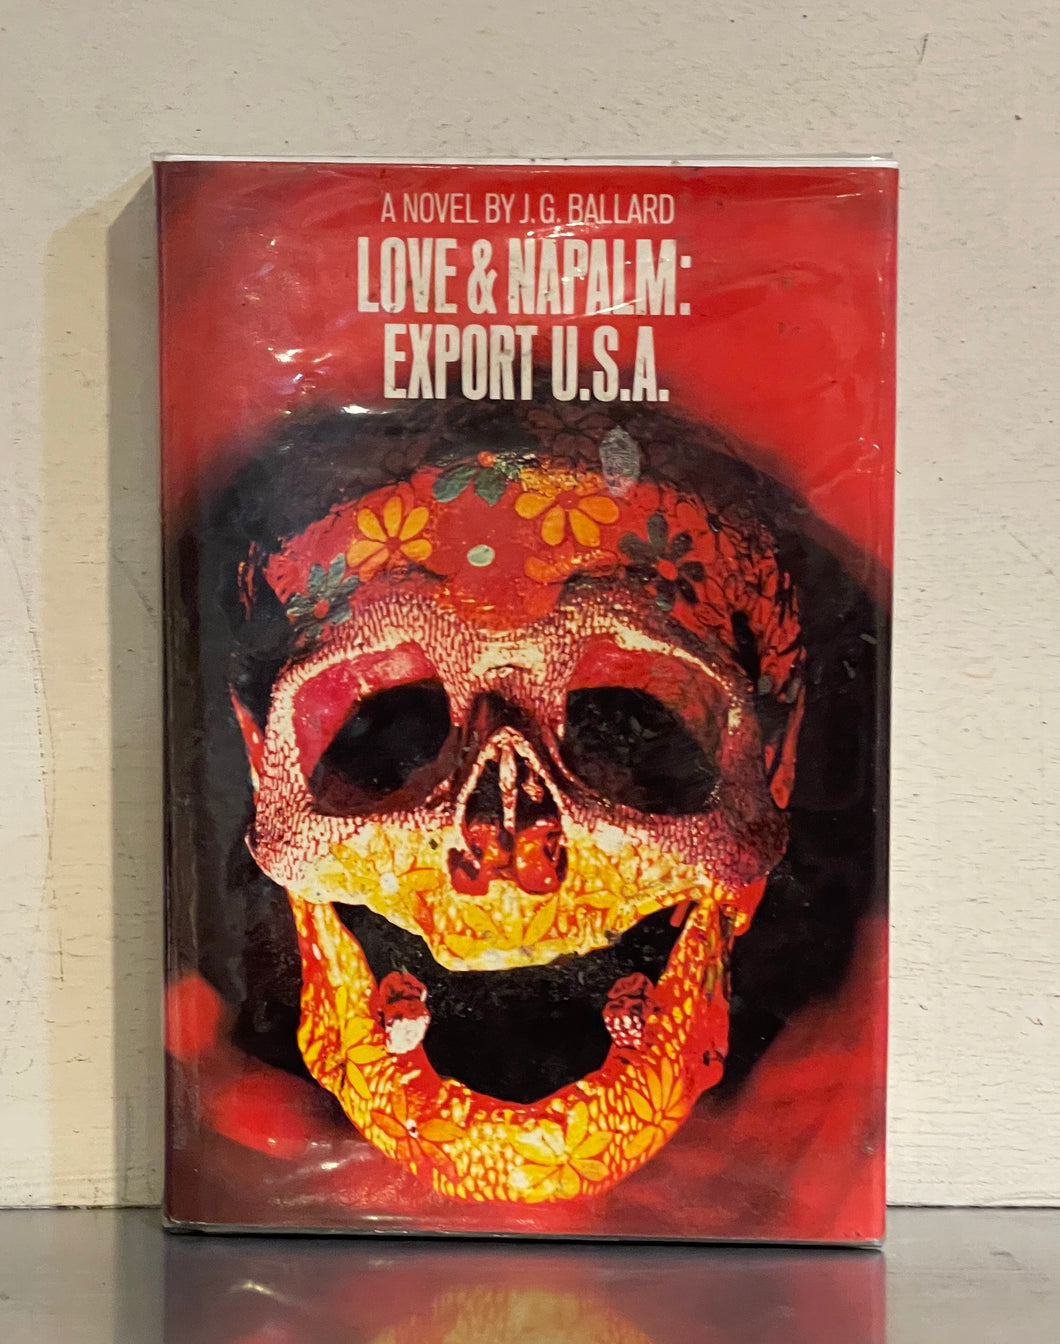 Love and Napalm: Export U.S.A